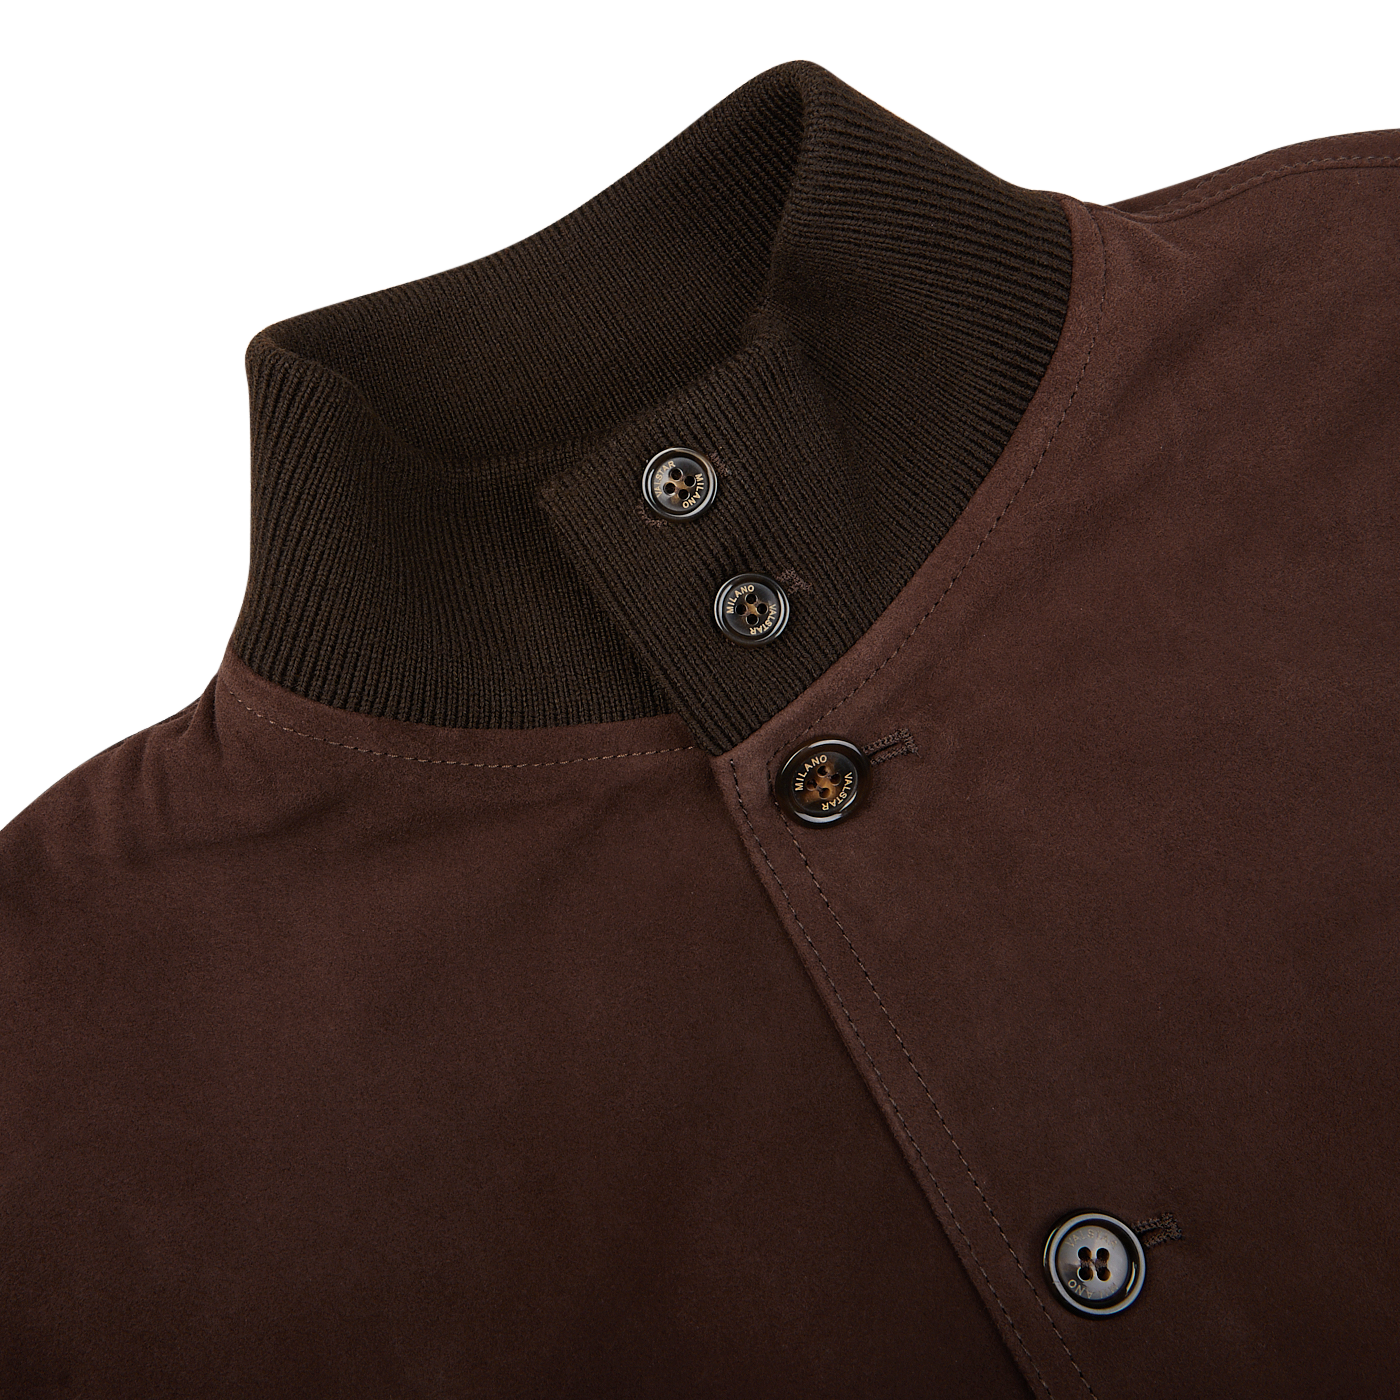 Dark Brown Suede Leather Valstarino Jacket by Valstar with ribbed collar and button placket.